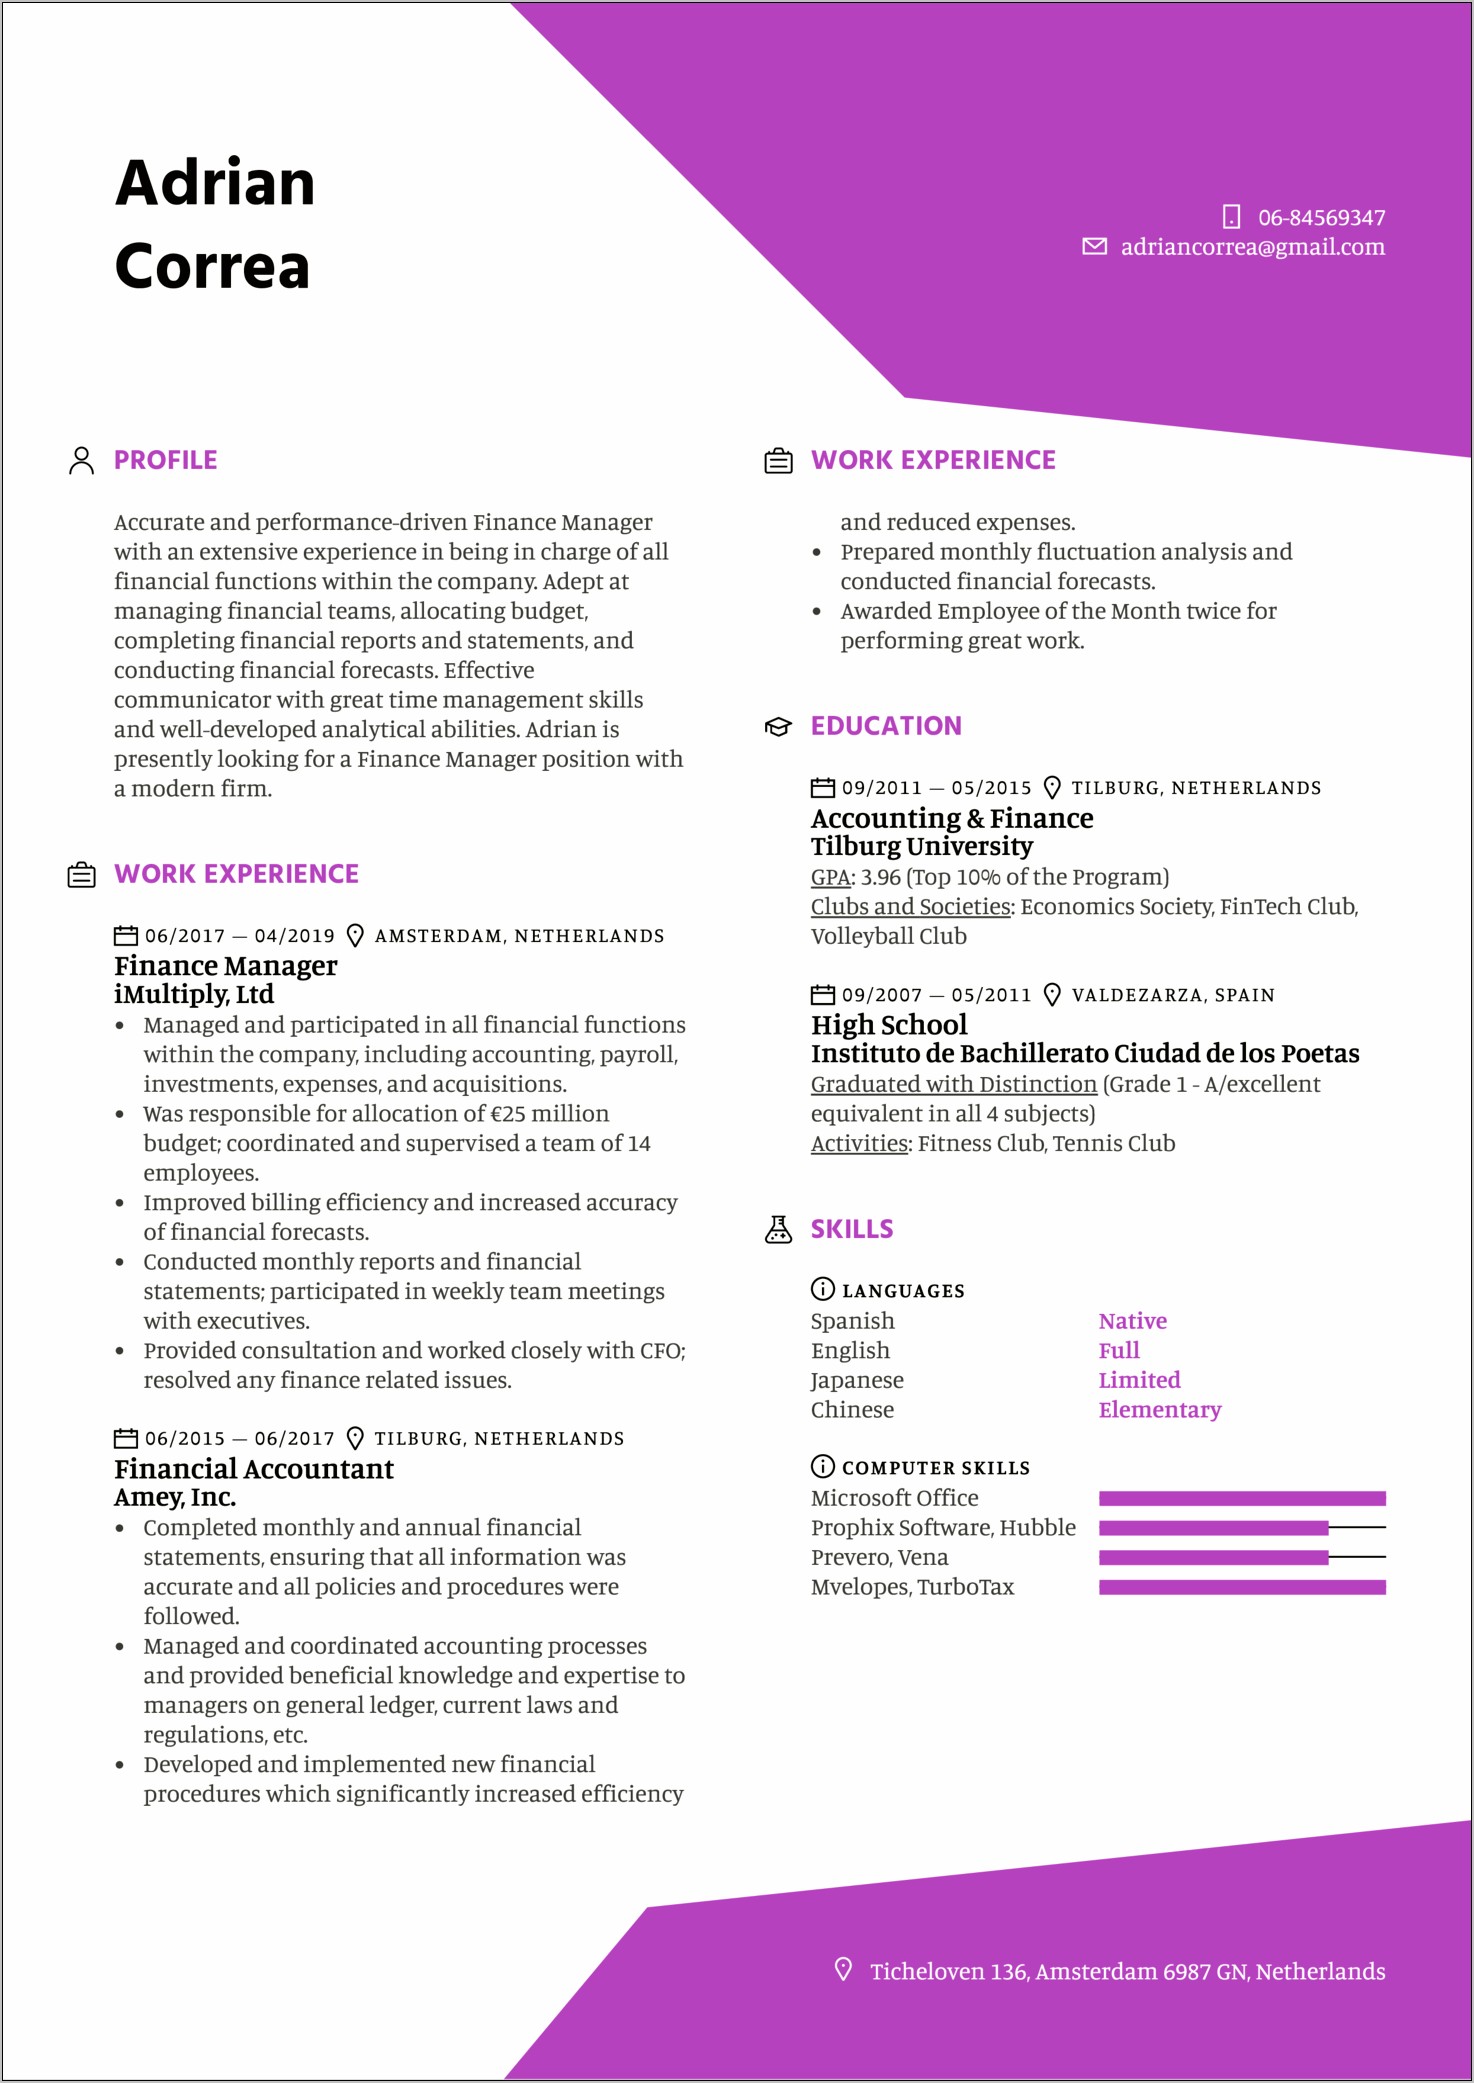 Career Objective In Resume For Finance Experienced